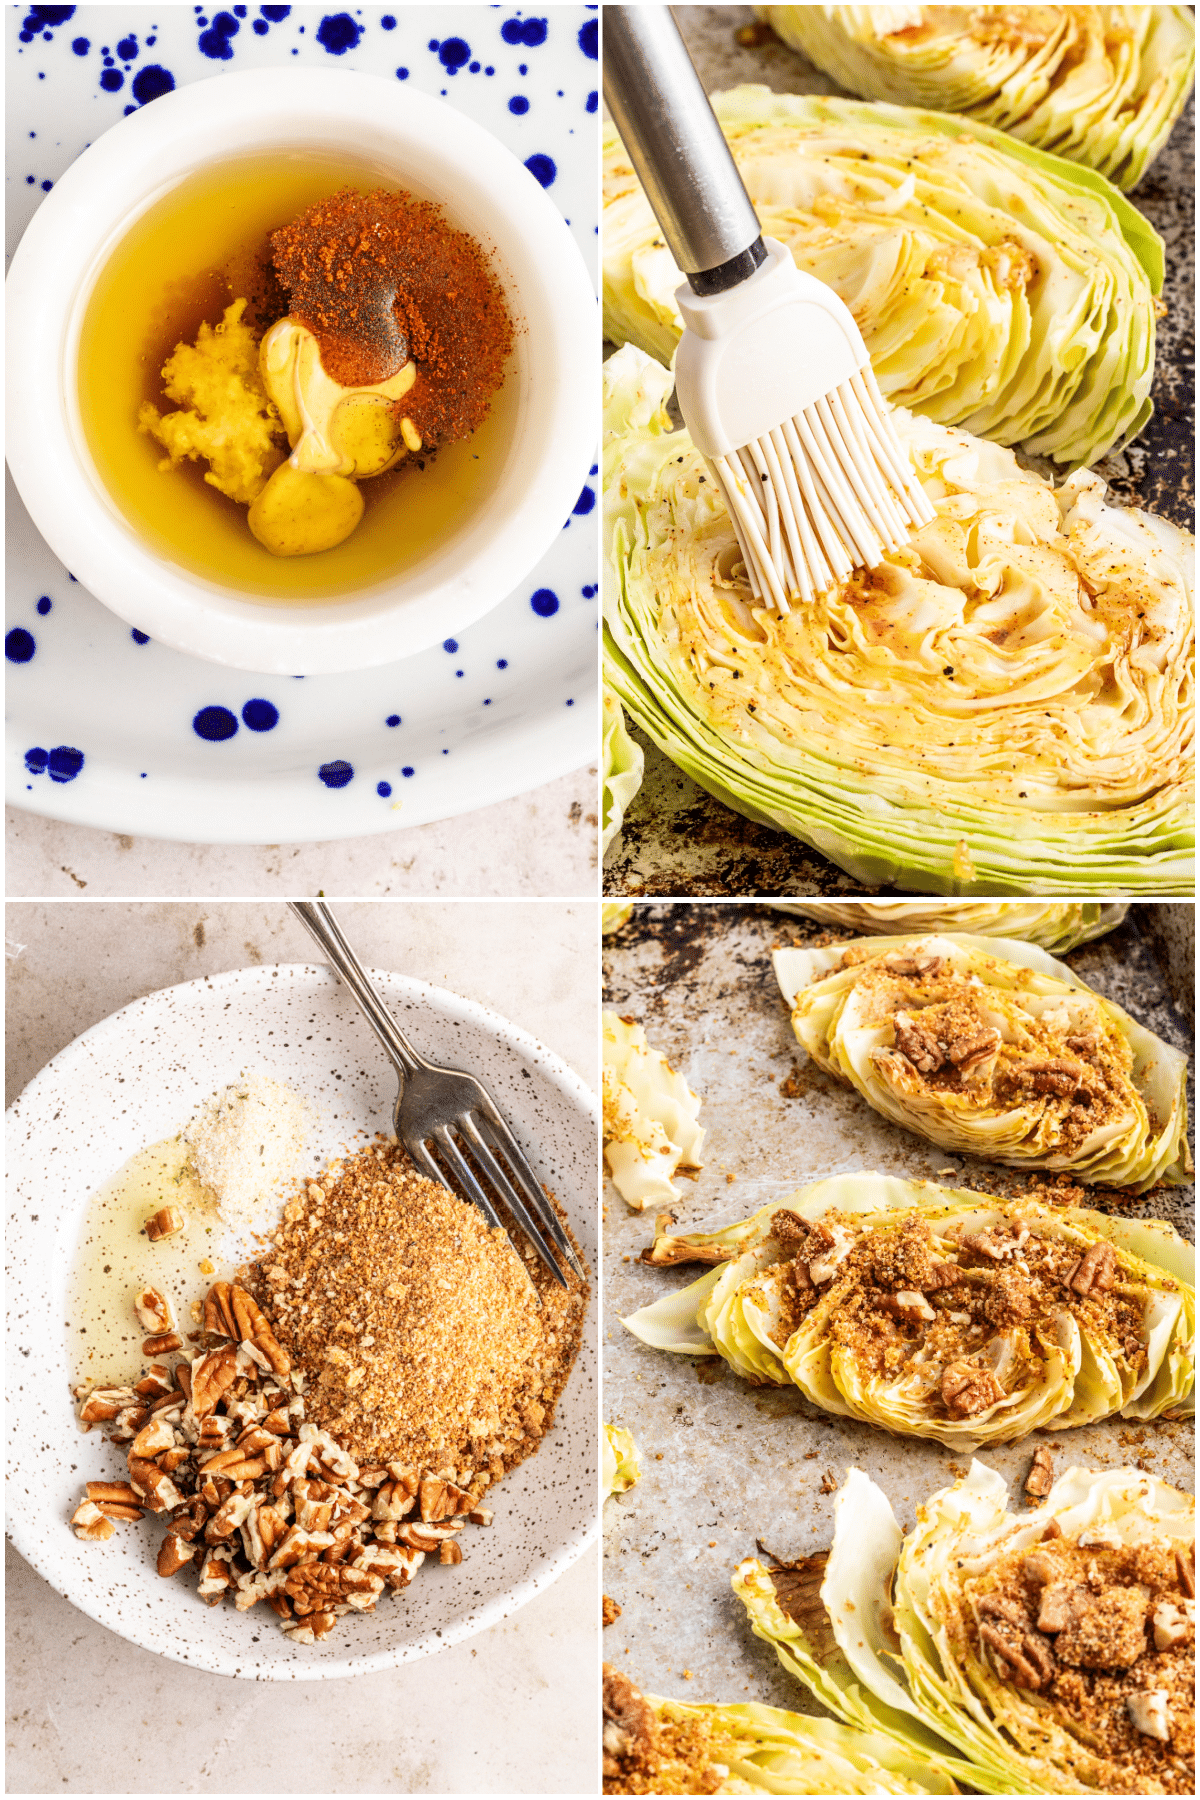 Four image collage showing how to make cabbage steaks: mix marinade, brush marinade over cabbage pieces, mix breading, sprinkle over cabbage pieces.